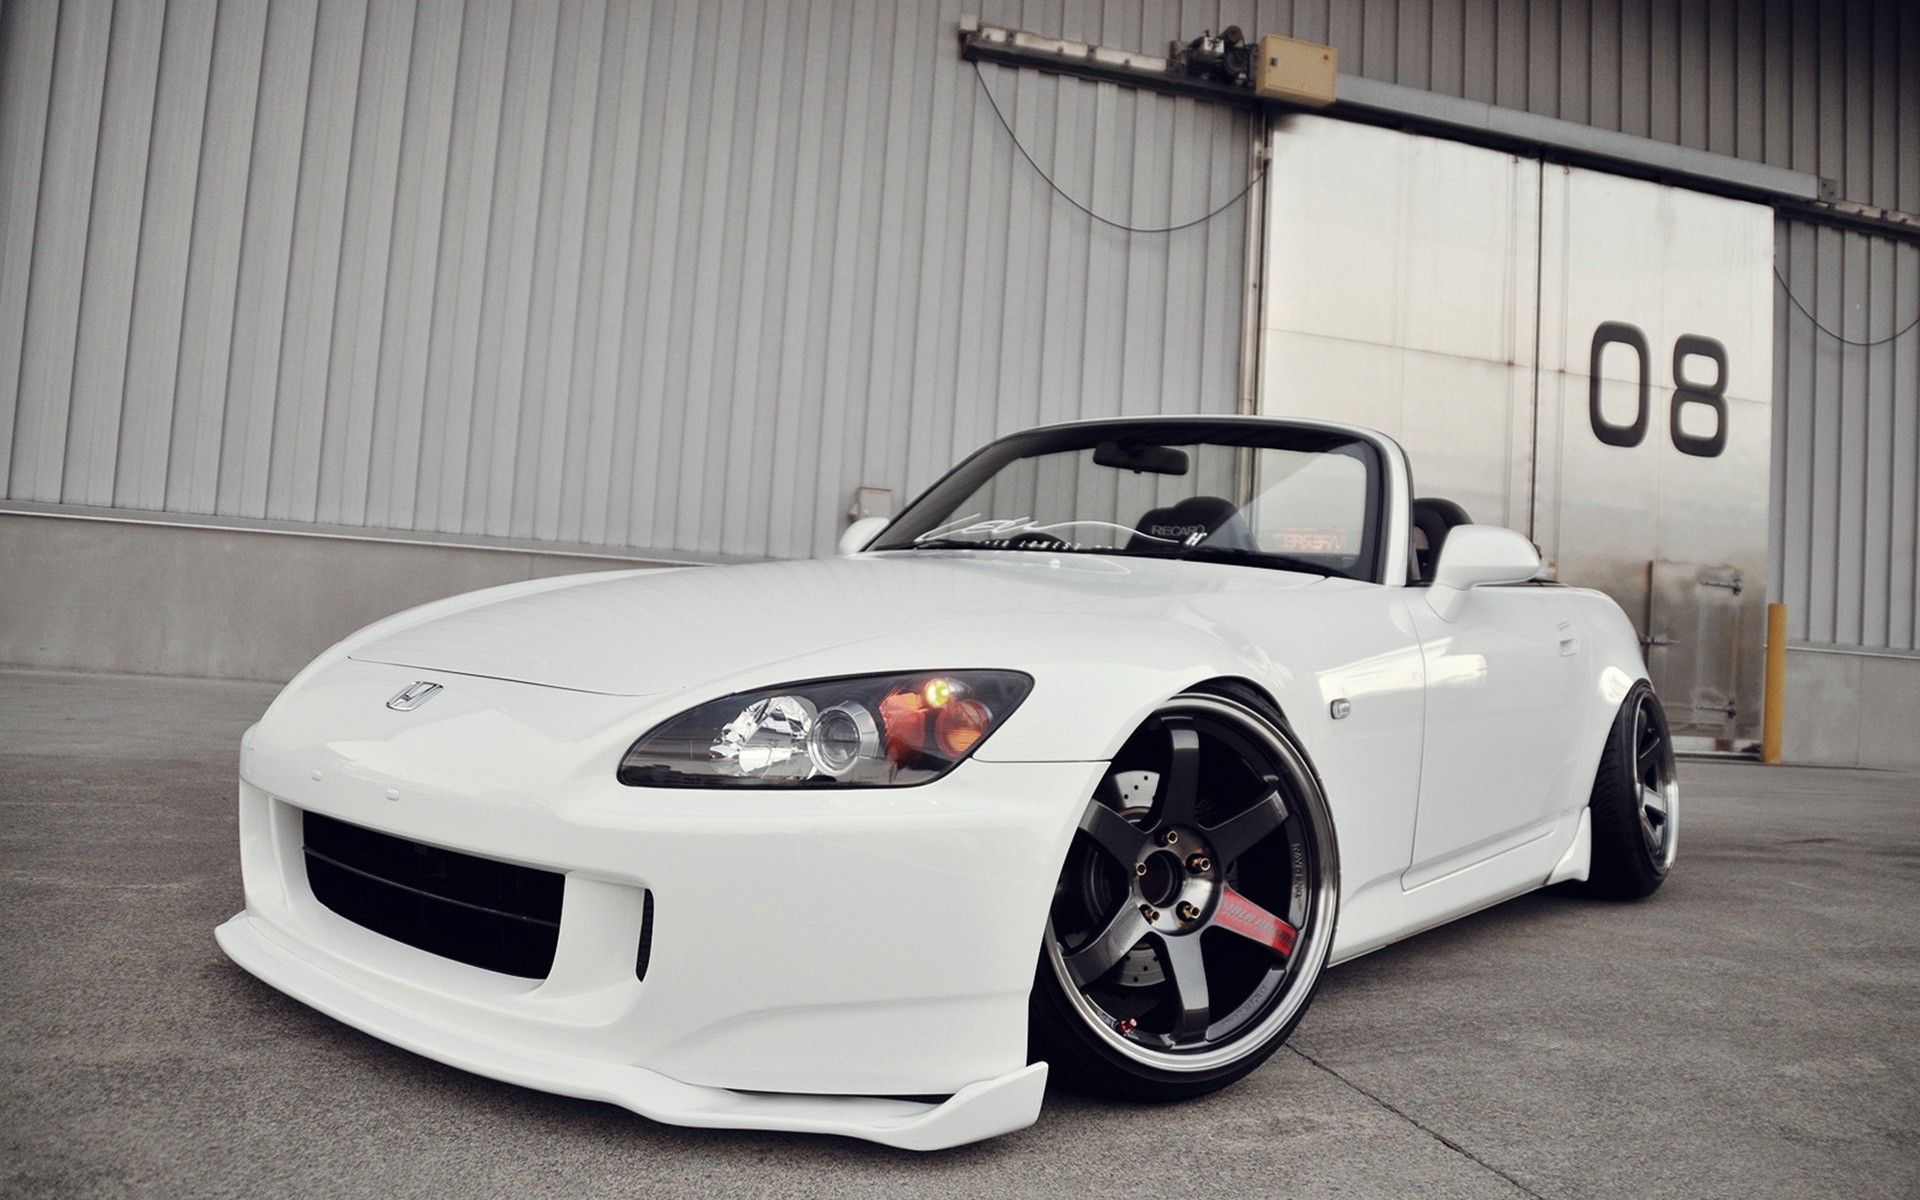 Stance, S2000, Low Ride Wallpaper